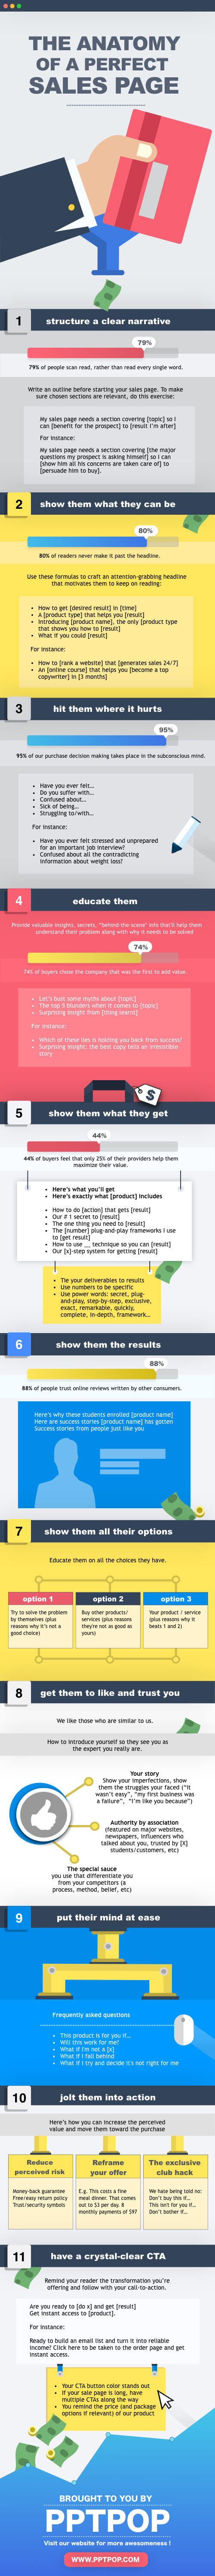 Infographic The Anatomy of a Sales Page